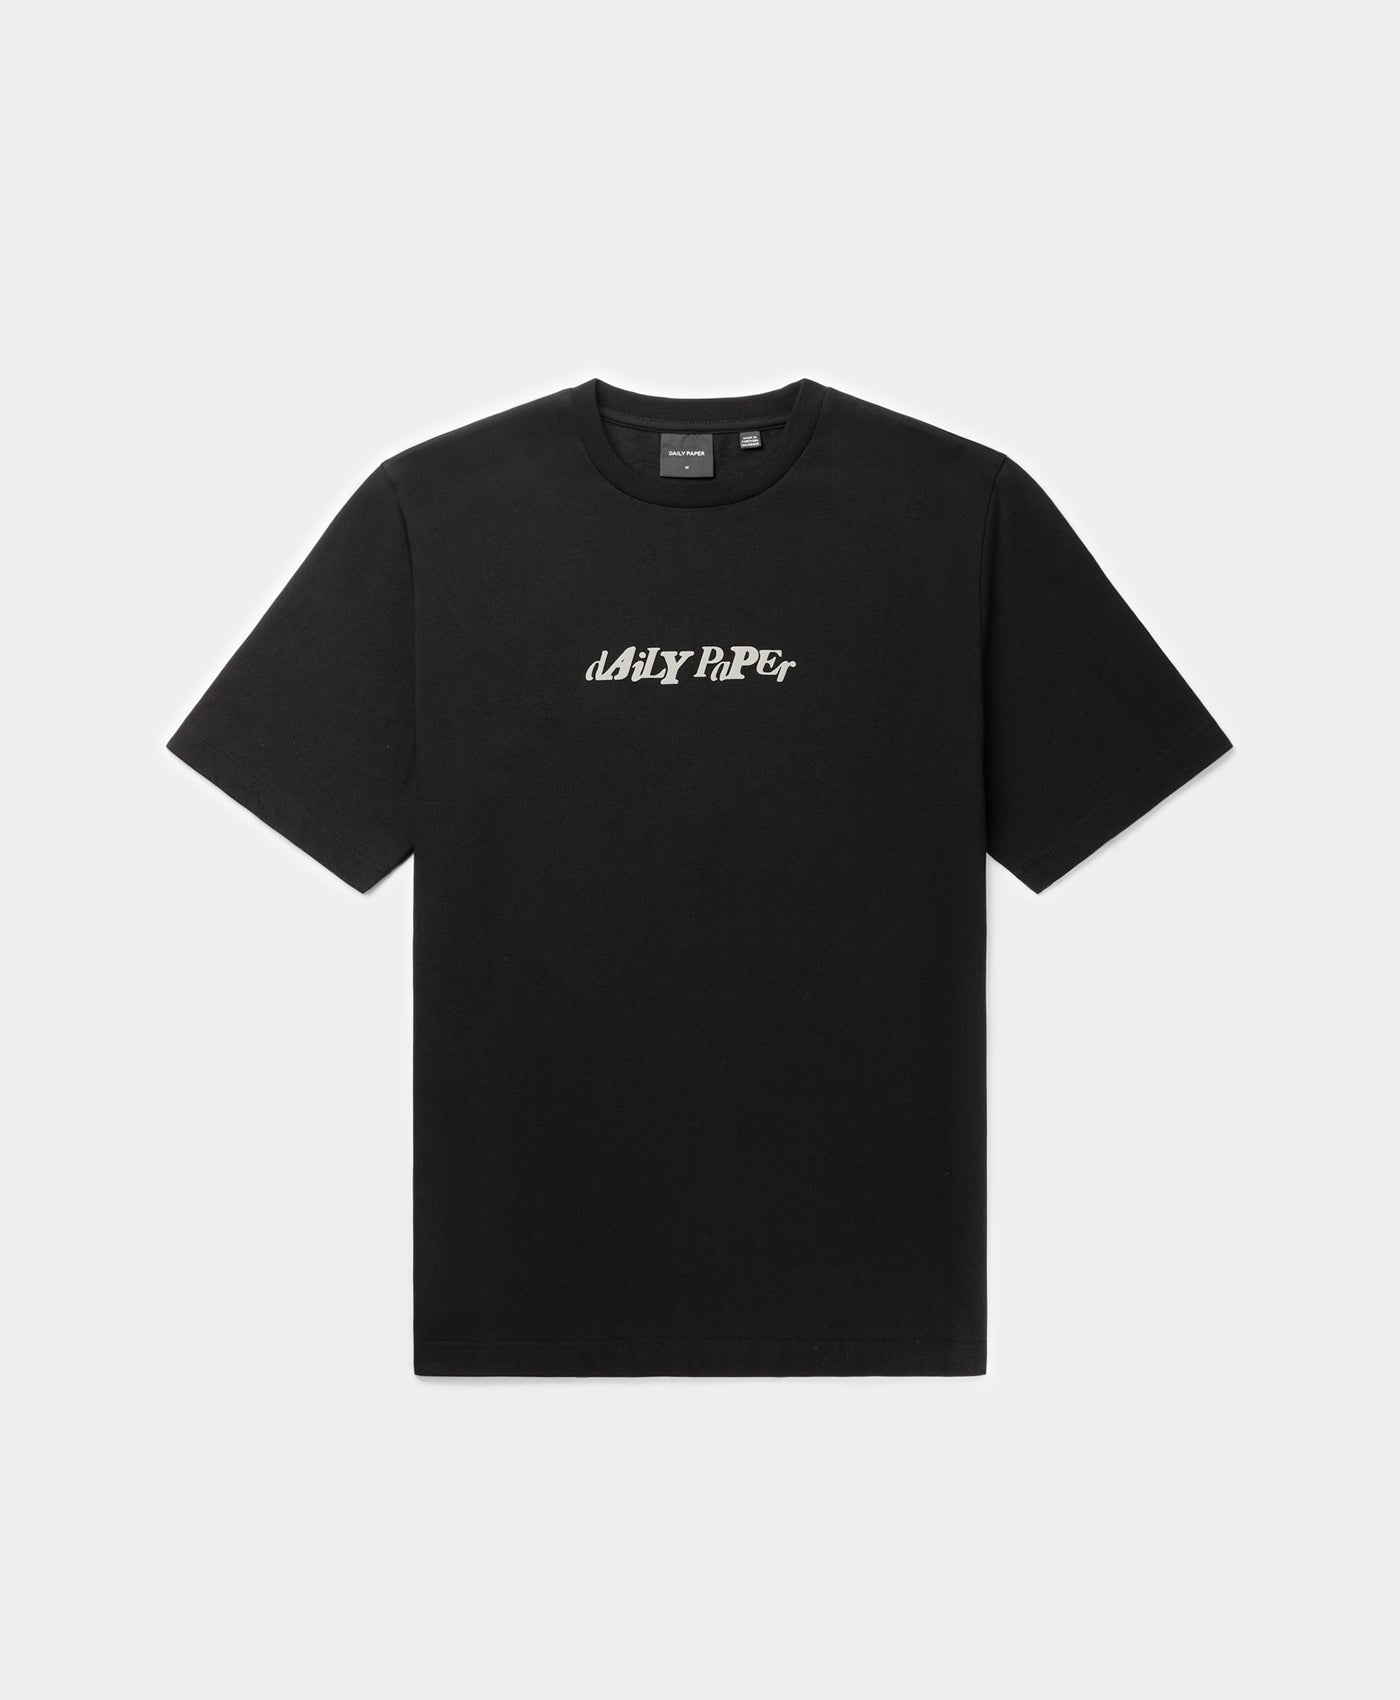 Daily Paper - Black Unified Type T-Shirt – Daily Paper Worldwide